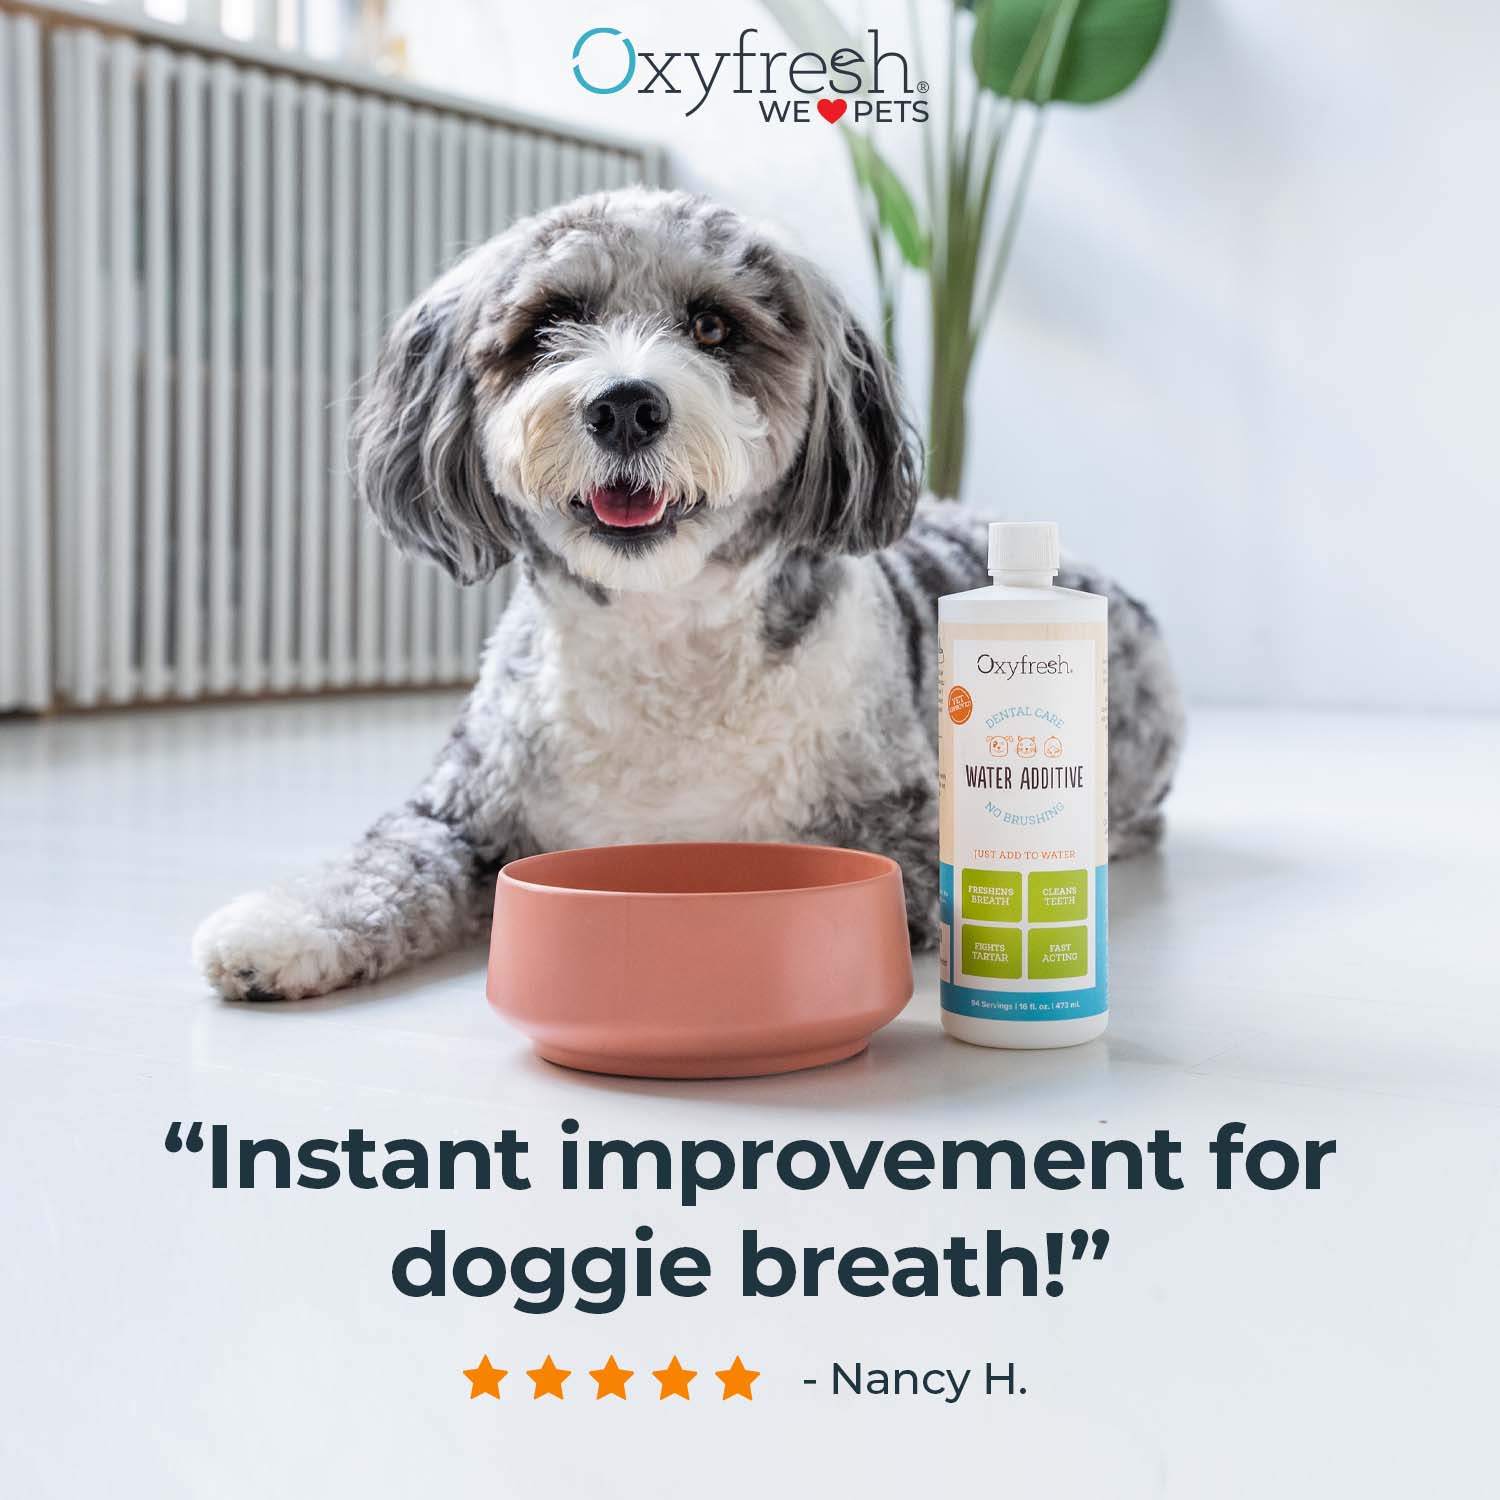 oxyfresh-pet-water-additive-review-"Instant-improvement-for-doggie-breath!"